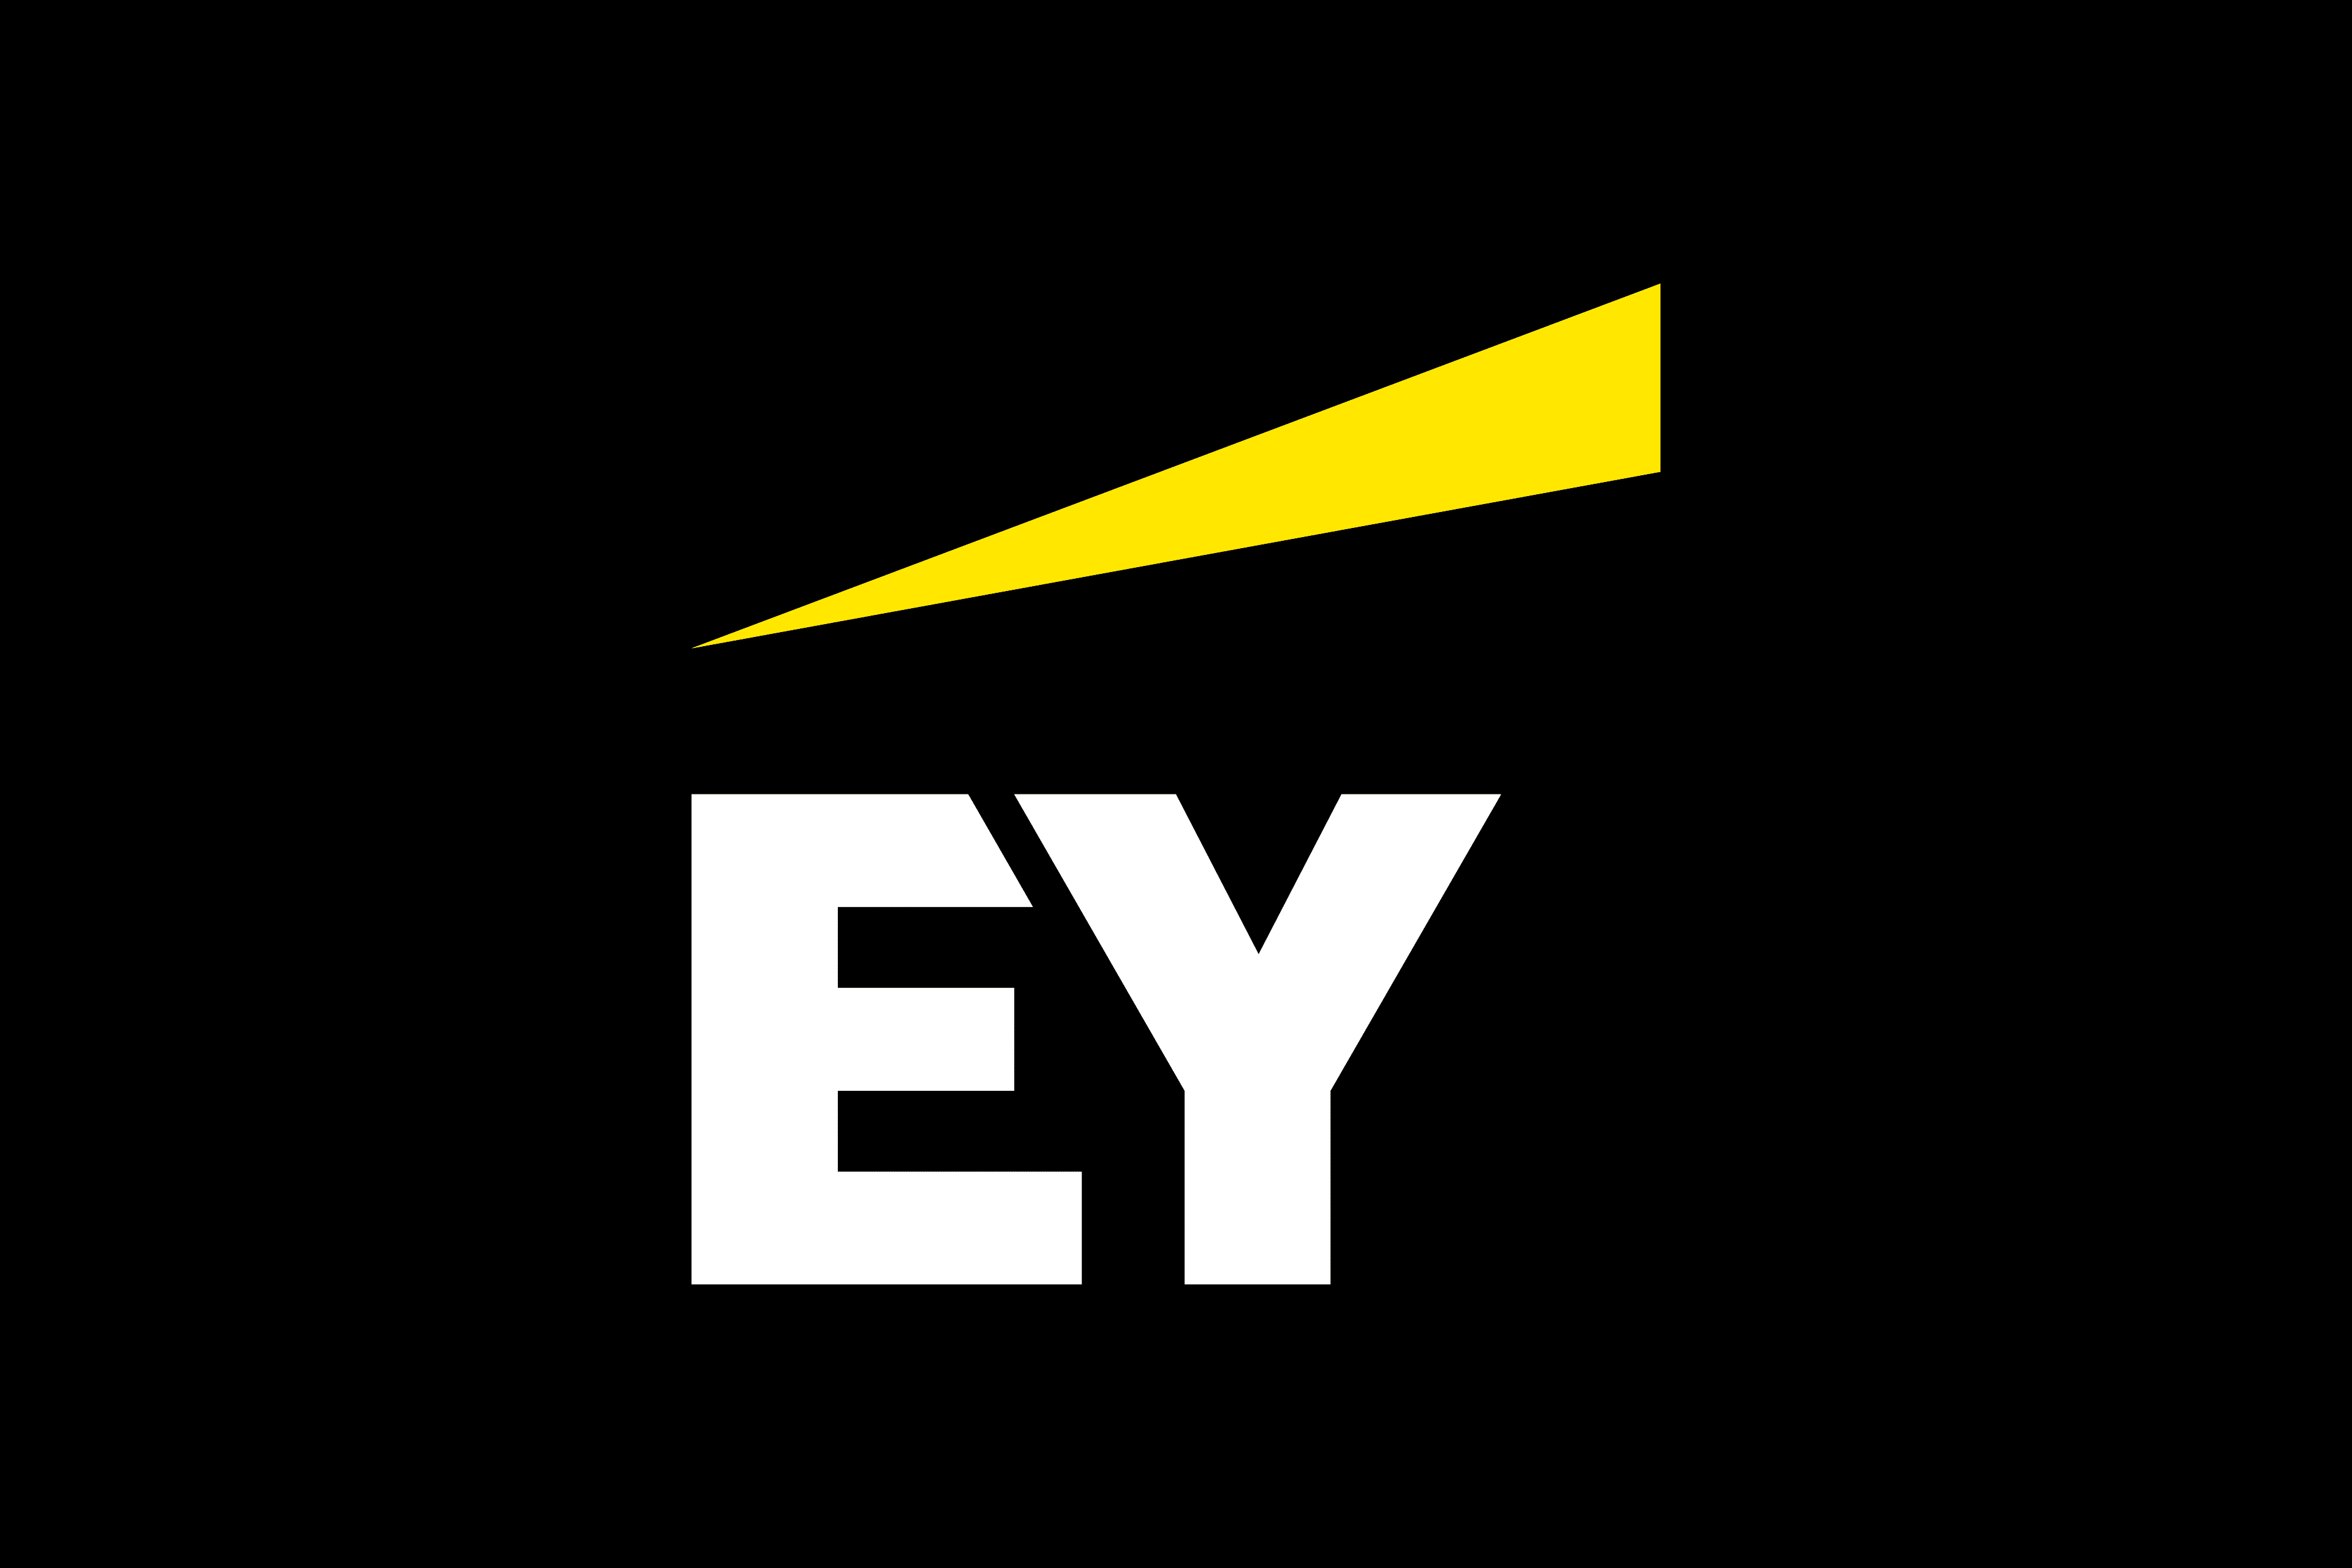 EY Offers Blockchain Solution to Verify Wine Authenticity ...